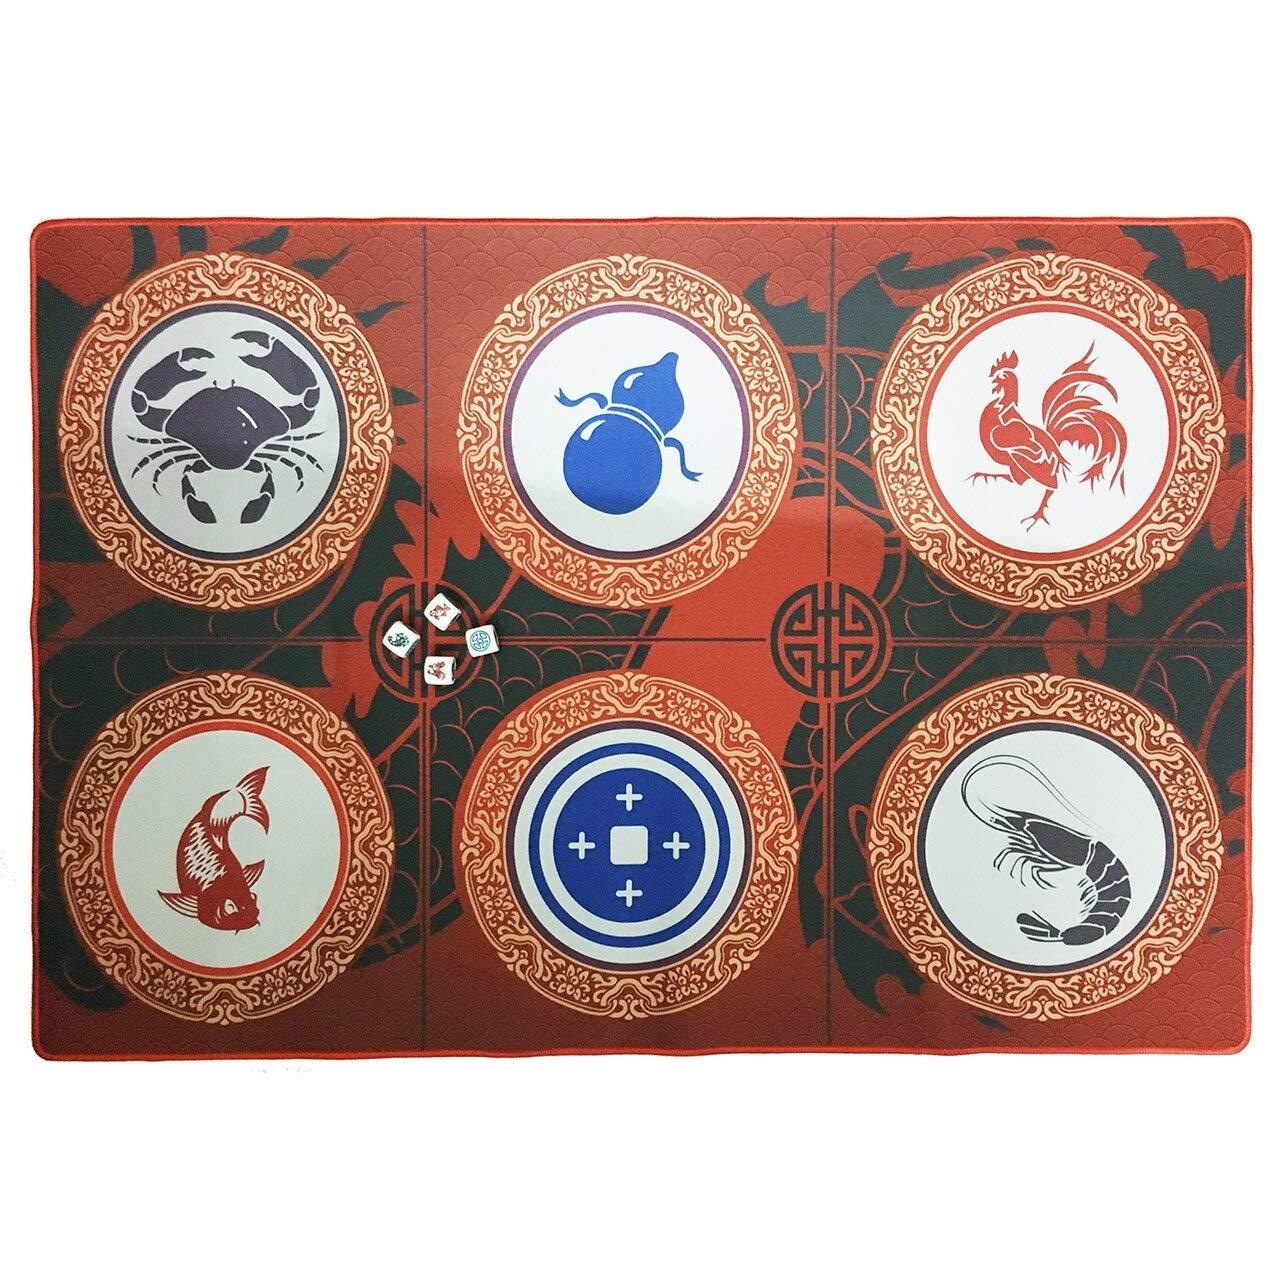 Fish Prawn Crab Dice Game - Asian Lucky Game - Adult Dice Game - Lunar New Year Game-BAU Cua Ca Cop - Chinese New Year Dice Game -